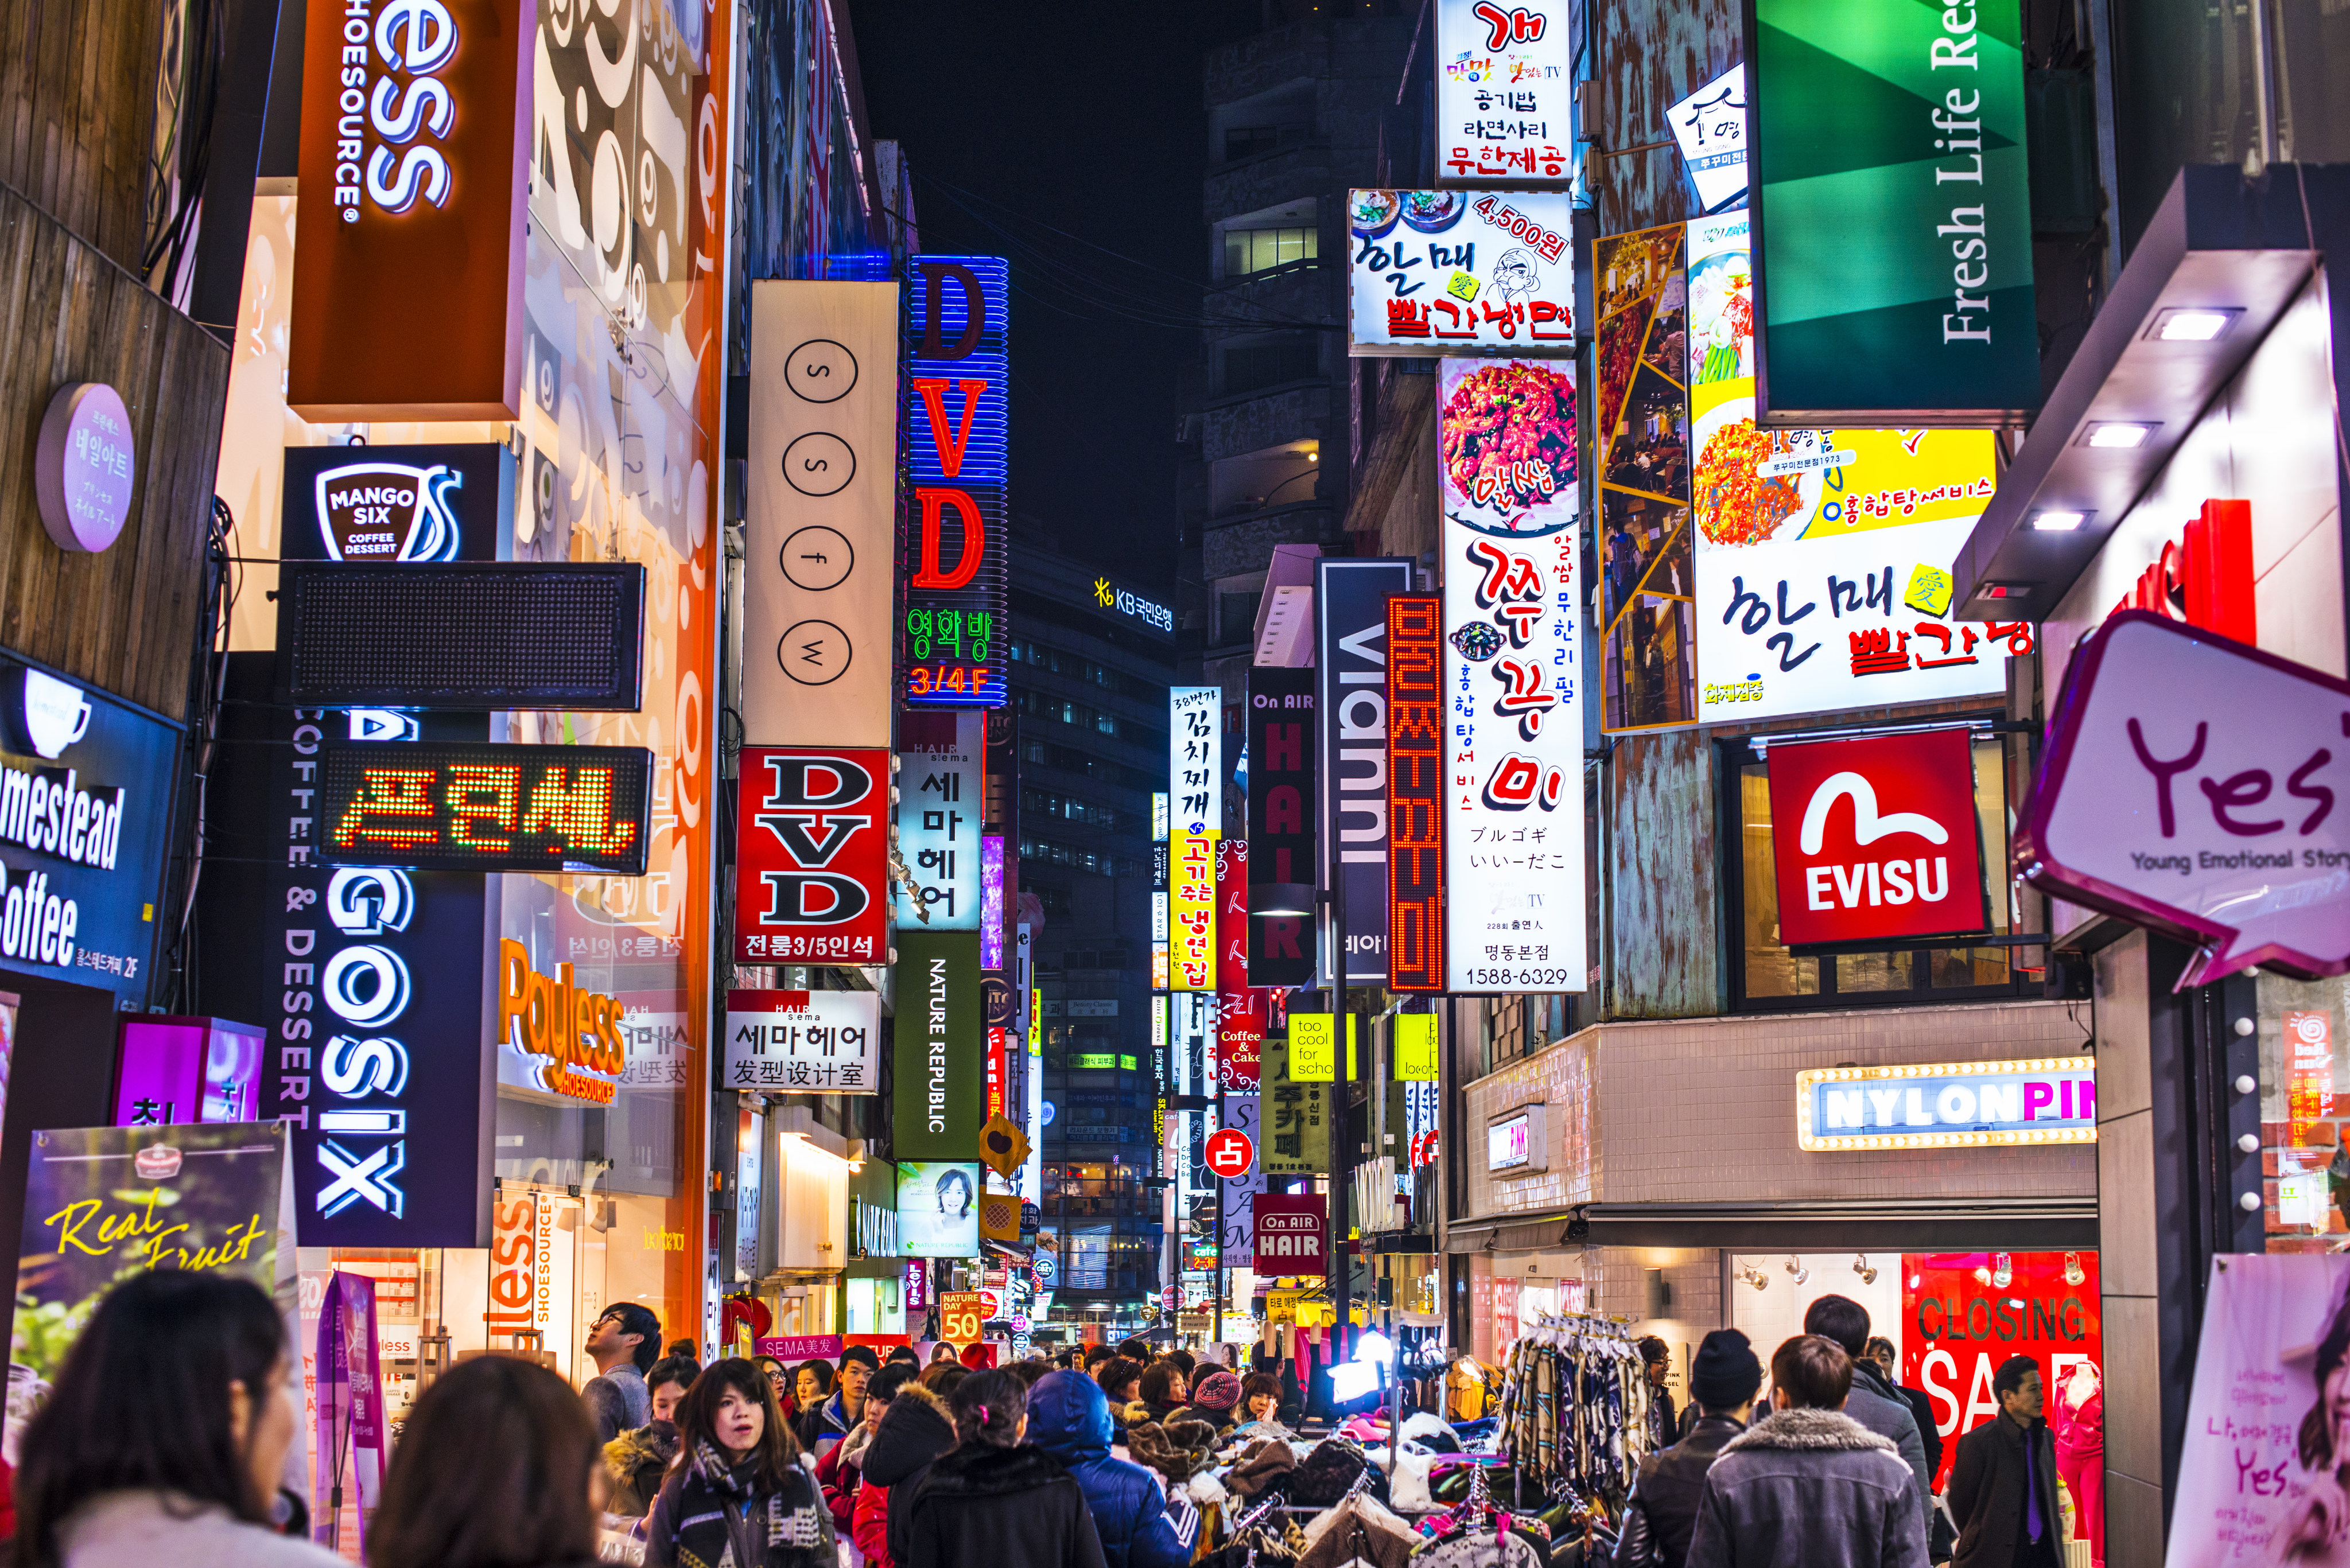 The Myeong-Dong shopping district in Seoul, South Korea. Photo: Getty Images